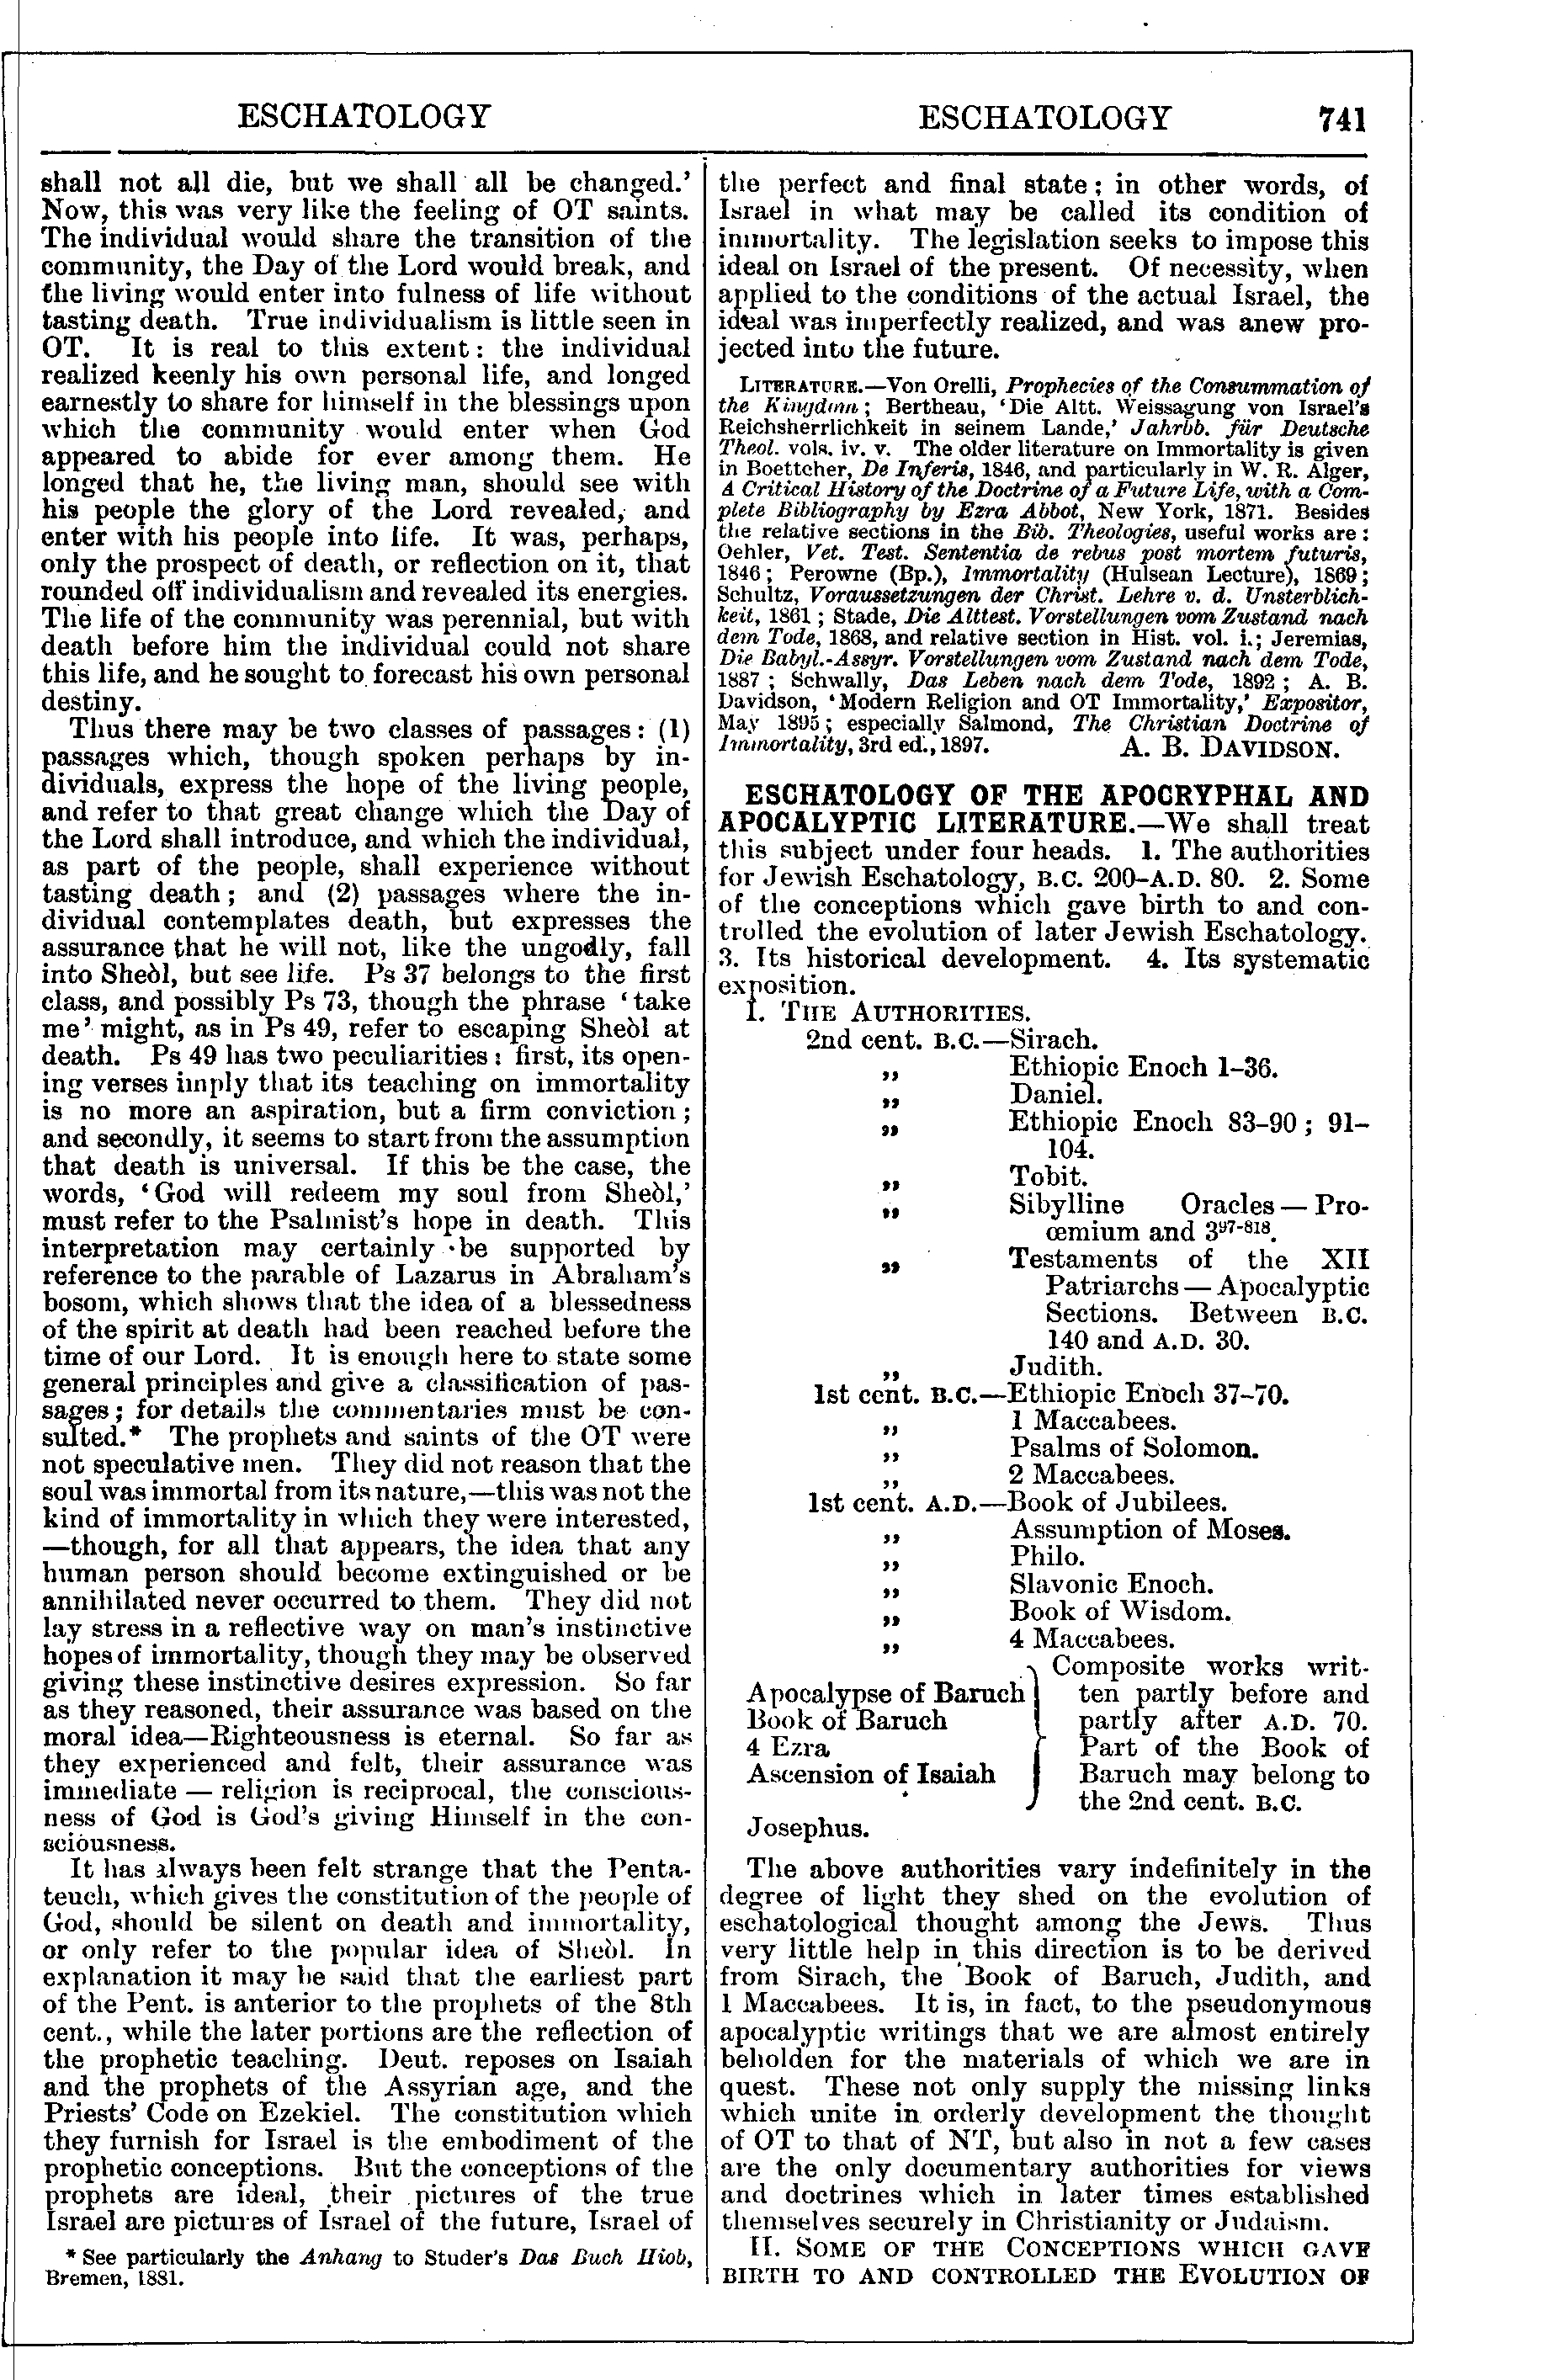 Image of page 741